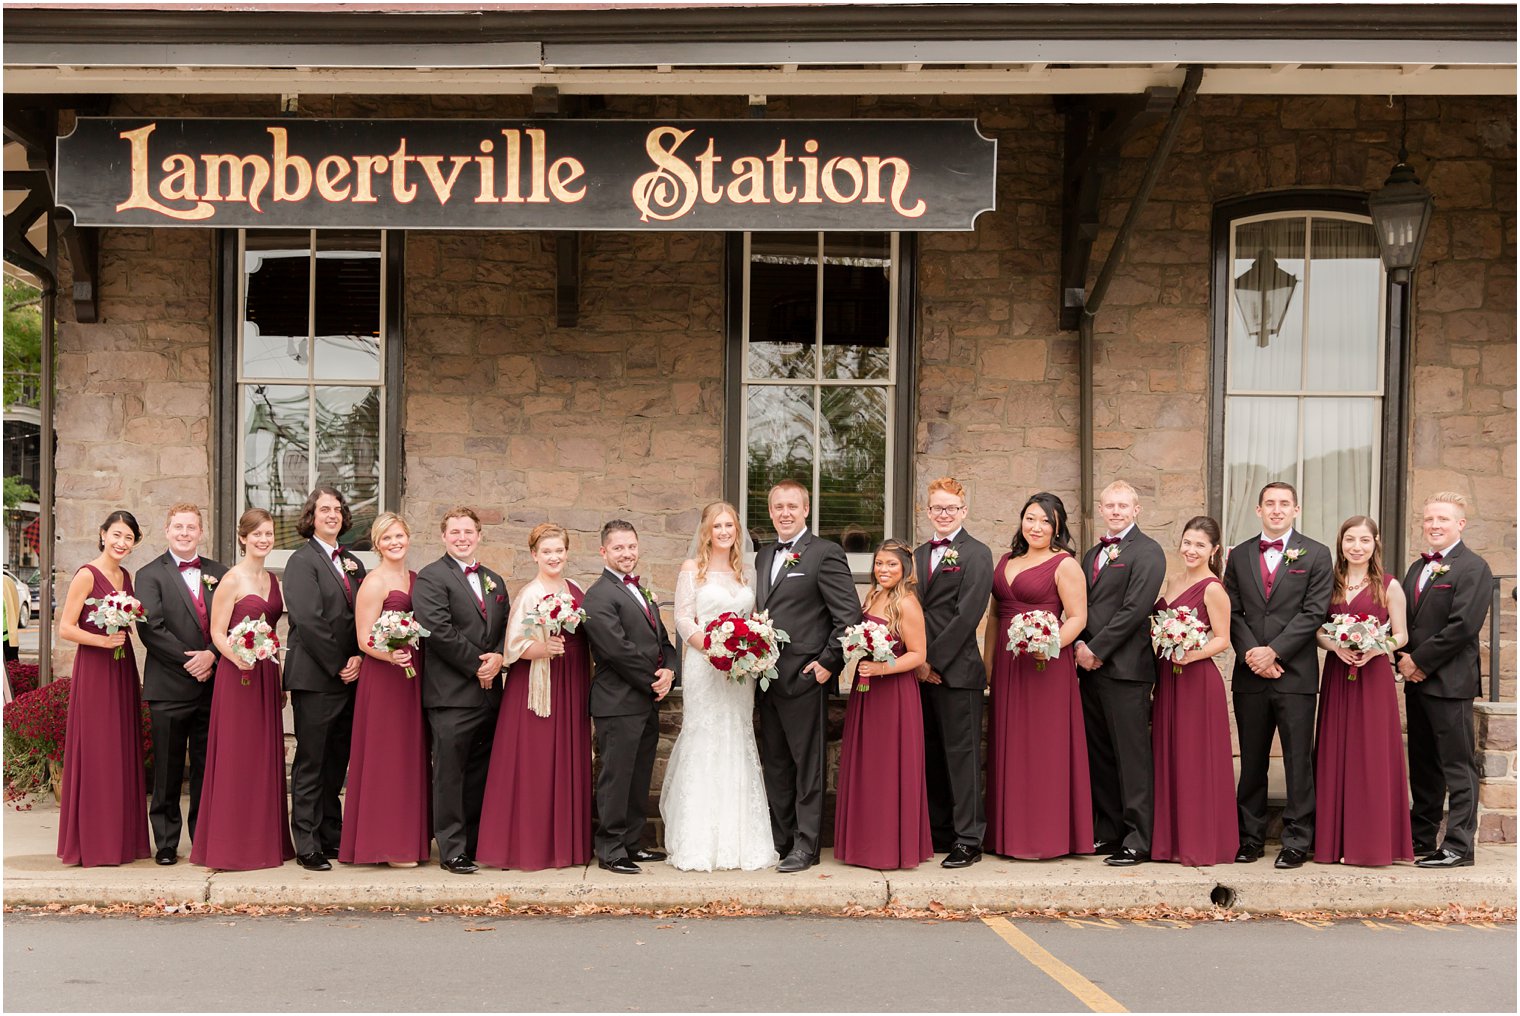 Bridal party in burgundy dresses and black tuxedos